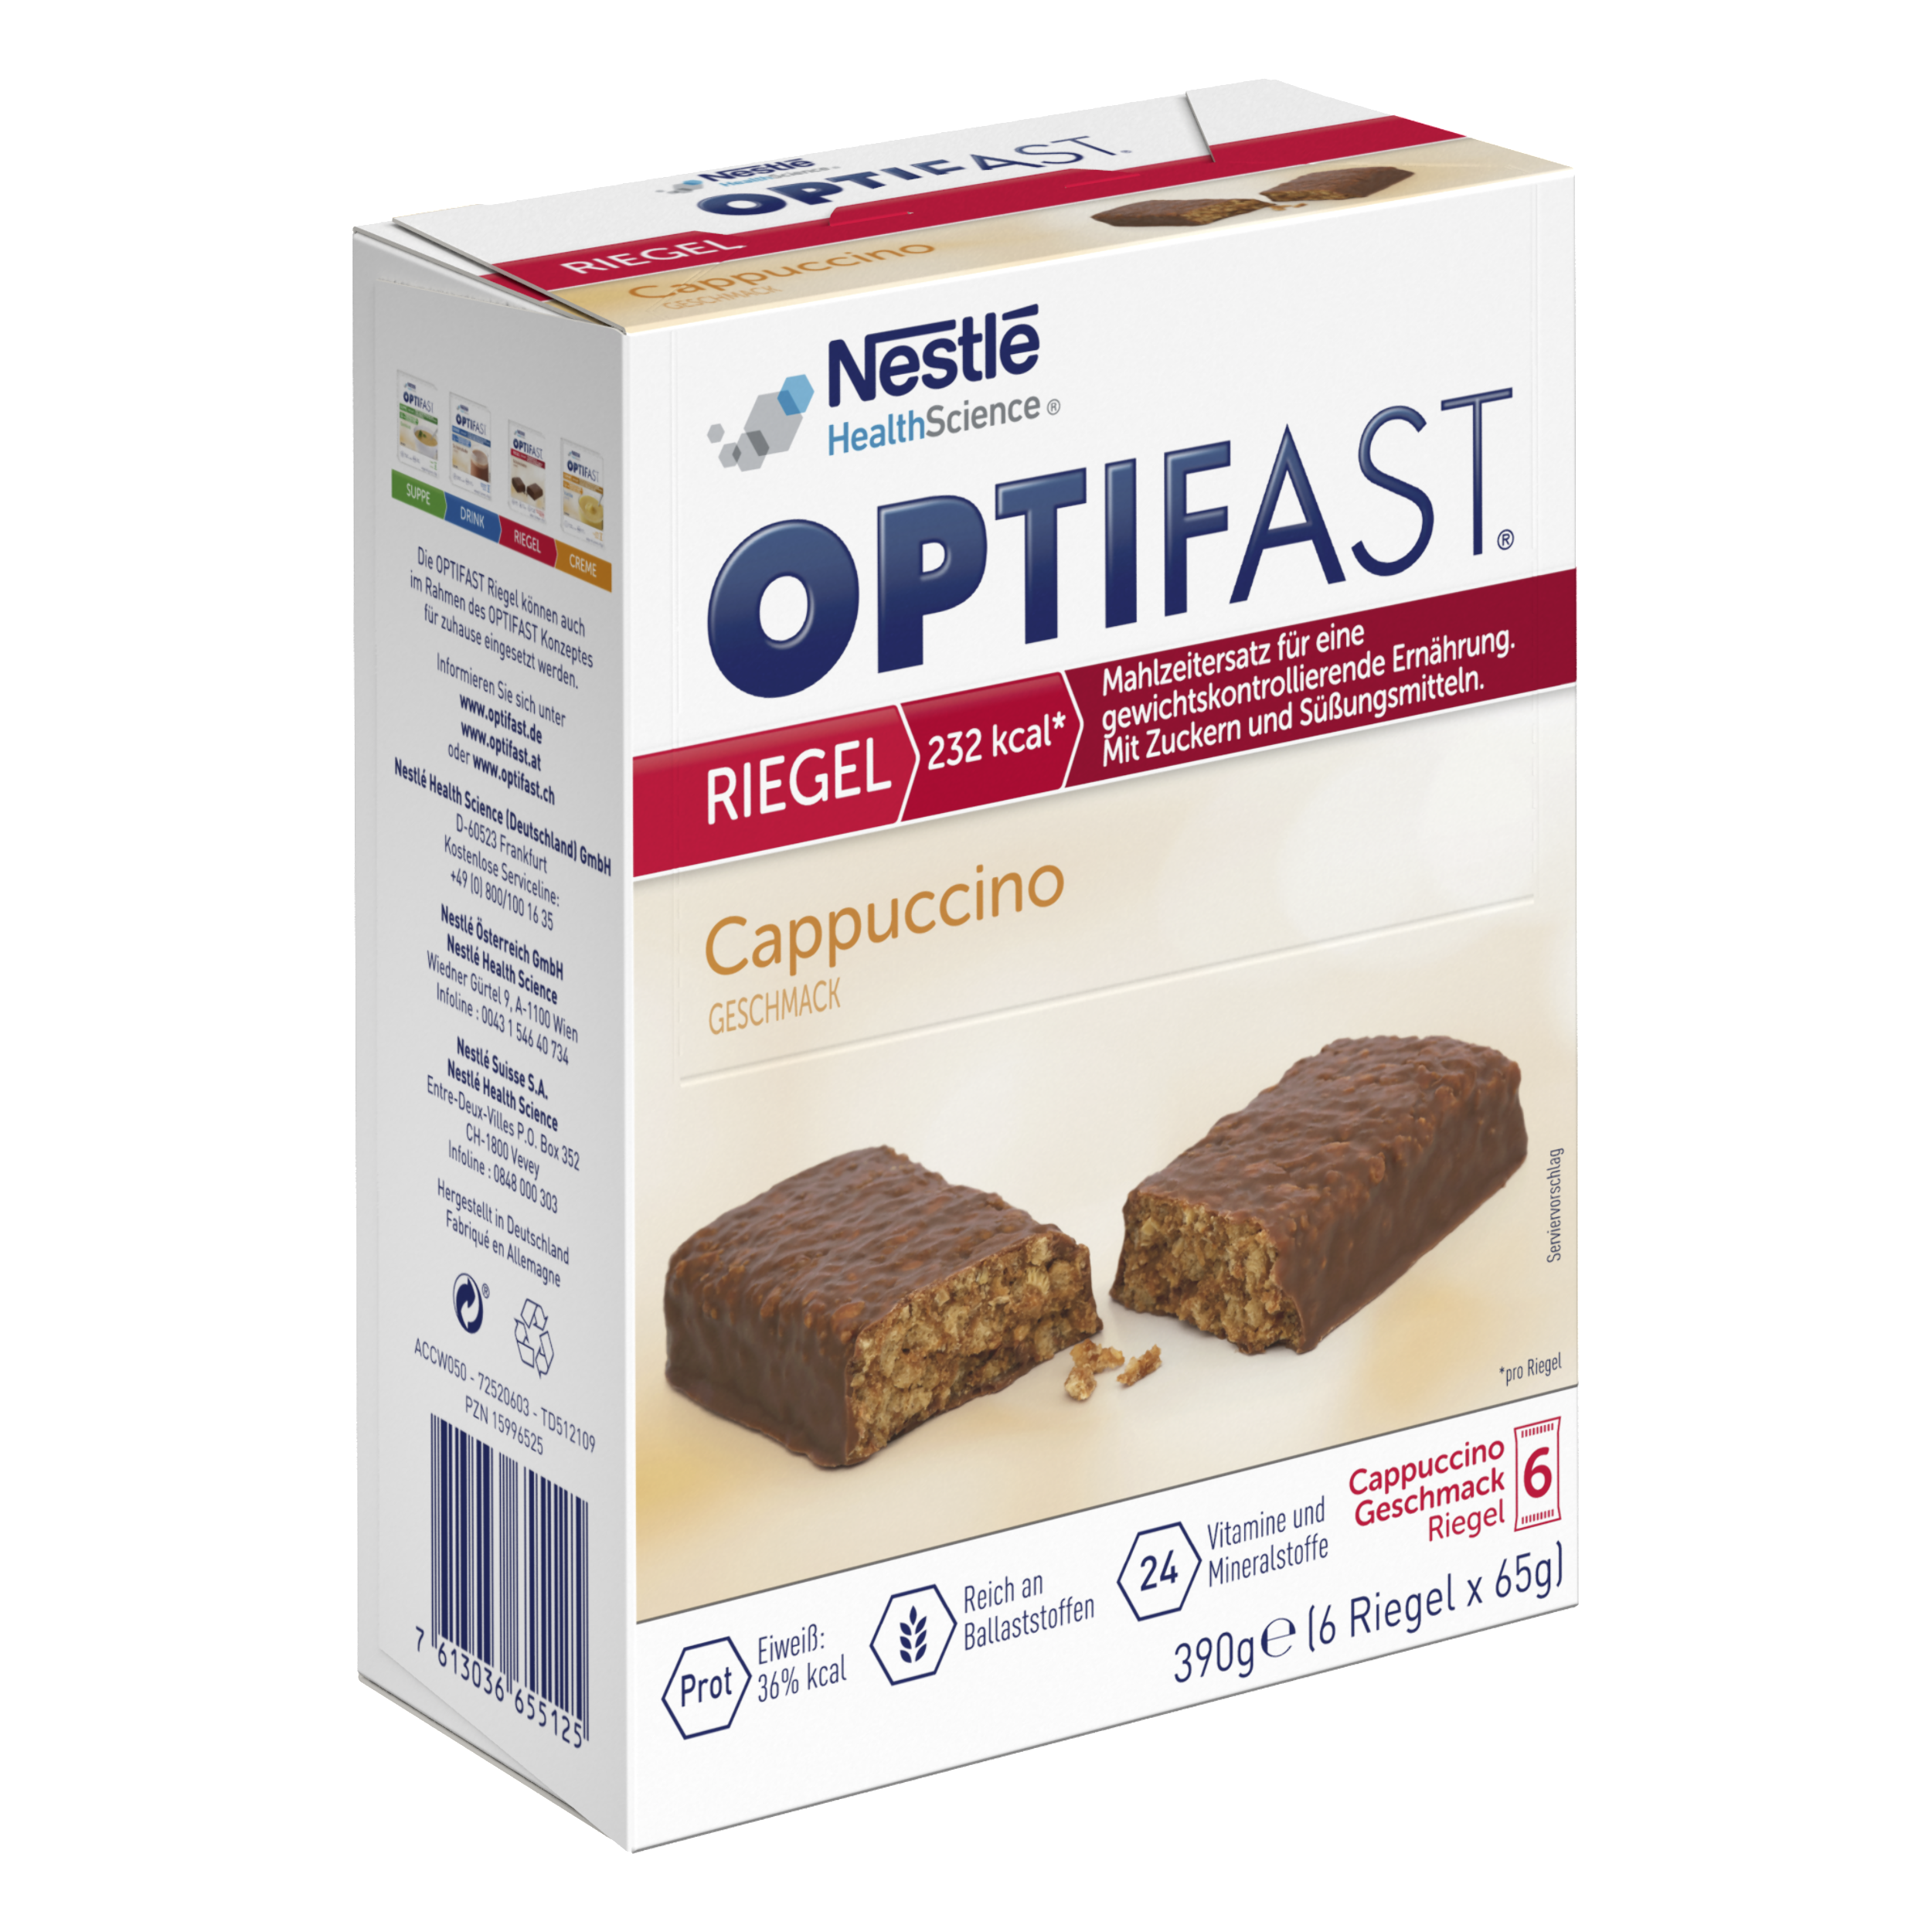 Optifast® Riegel Cappuccino